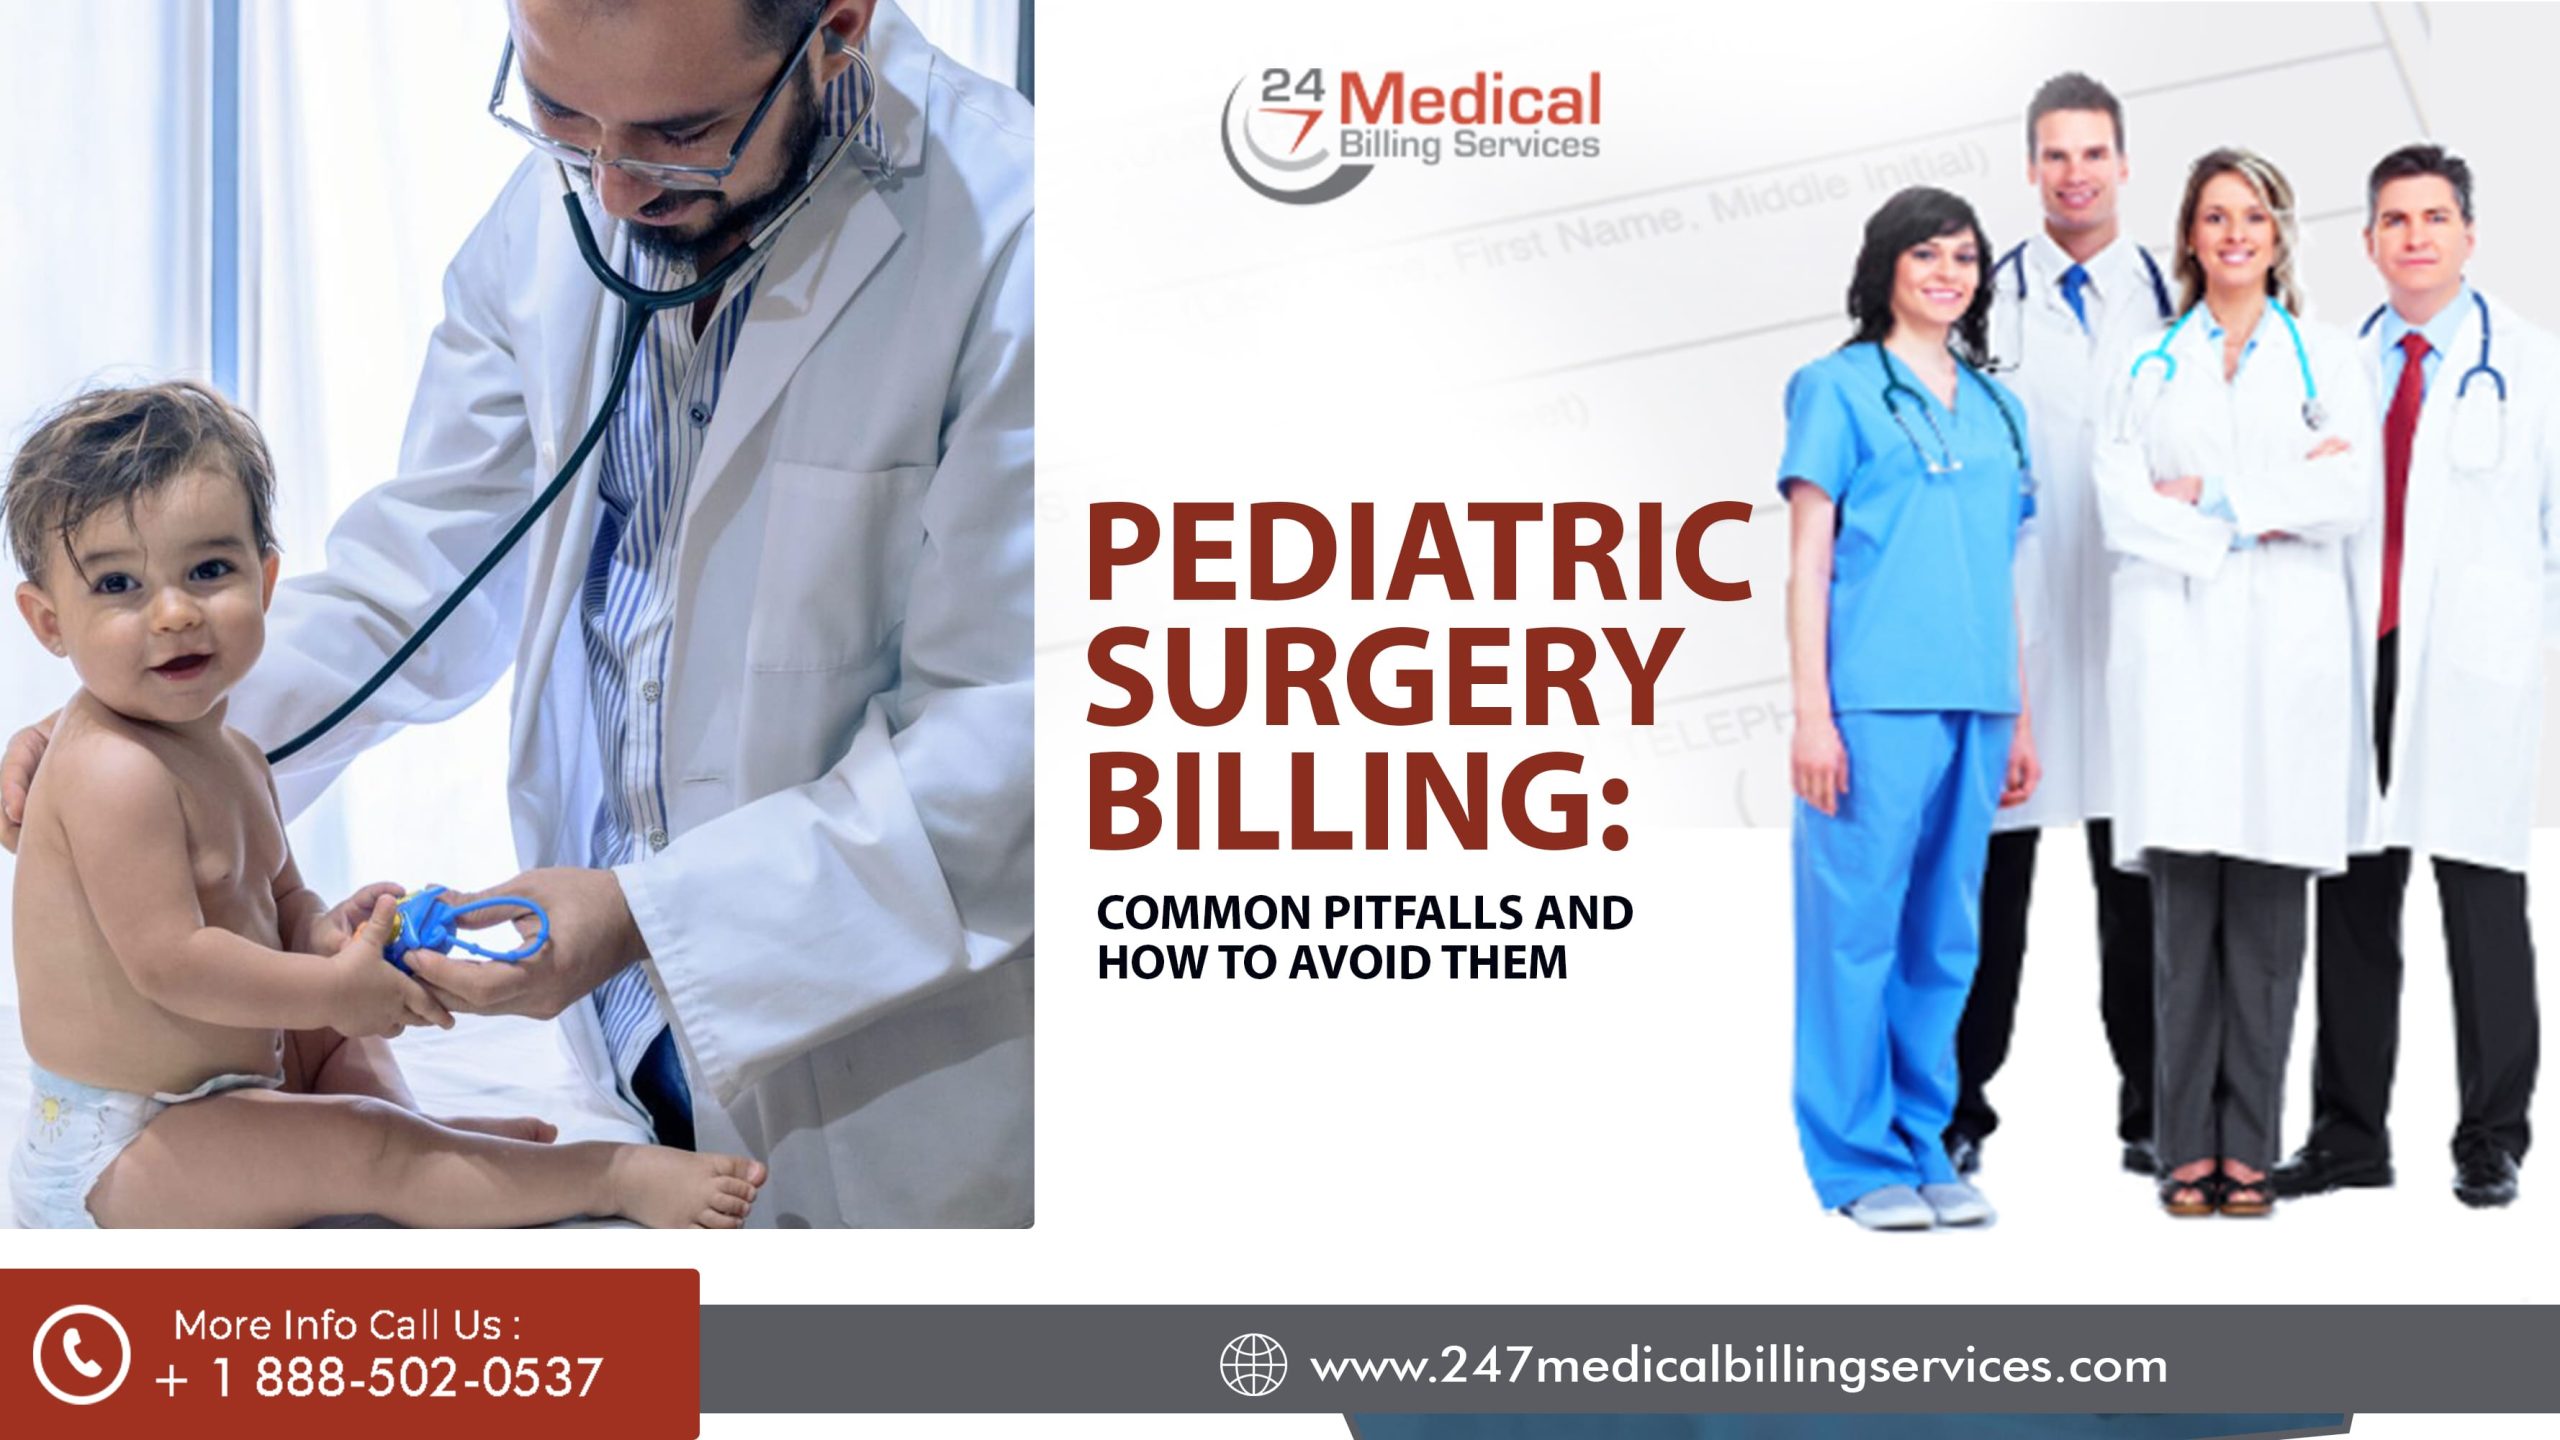  Pediatric Surgery Billing: Common Pitfalls and How to Avoid Them